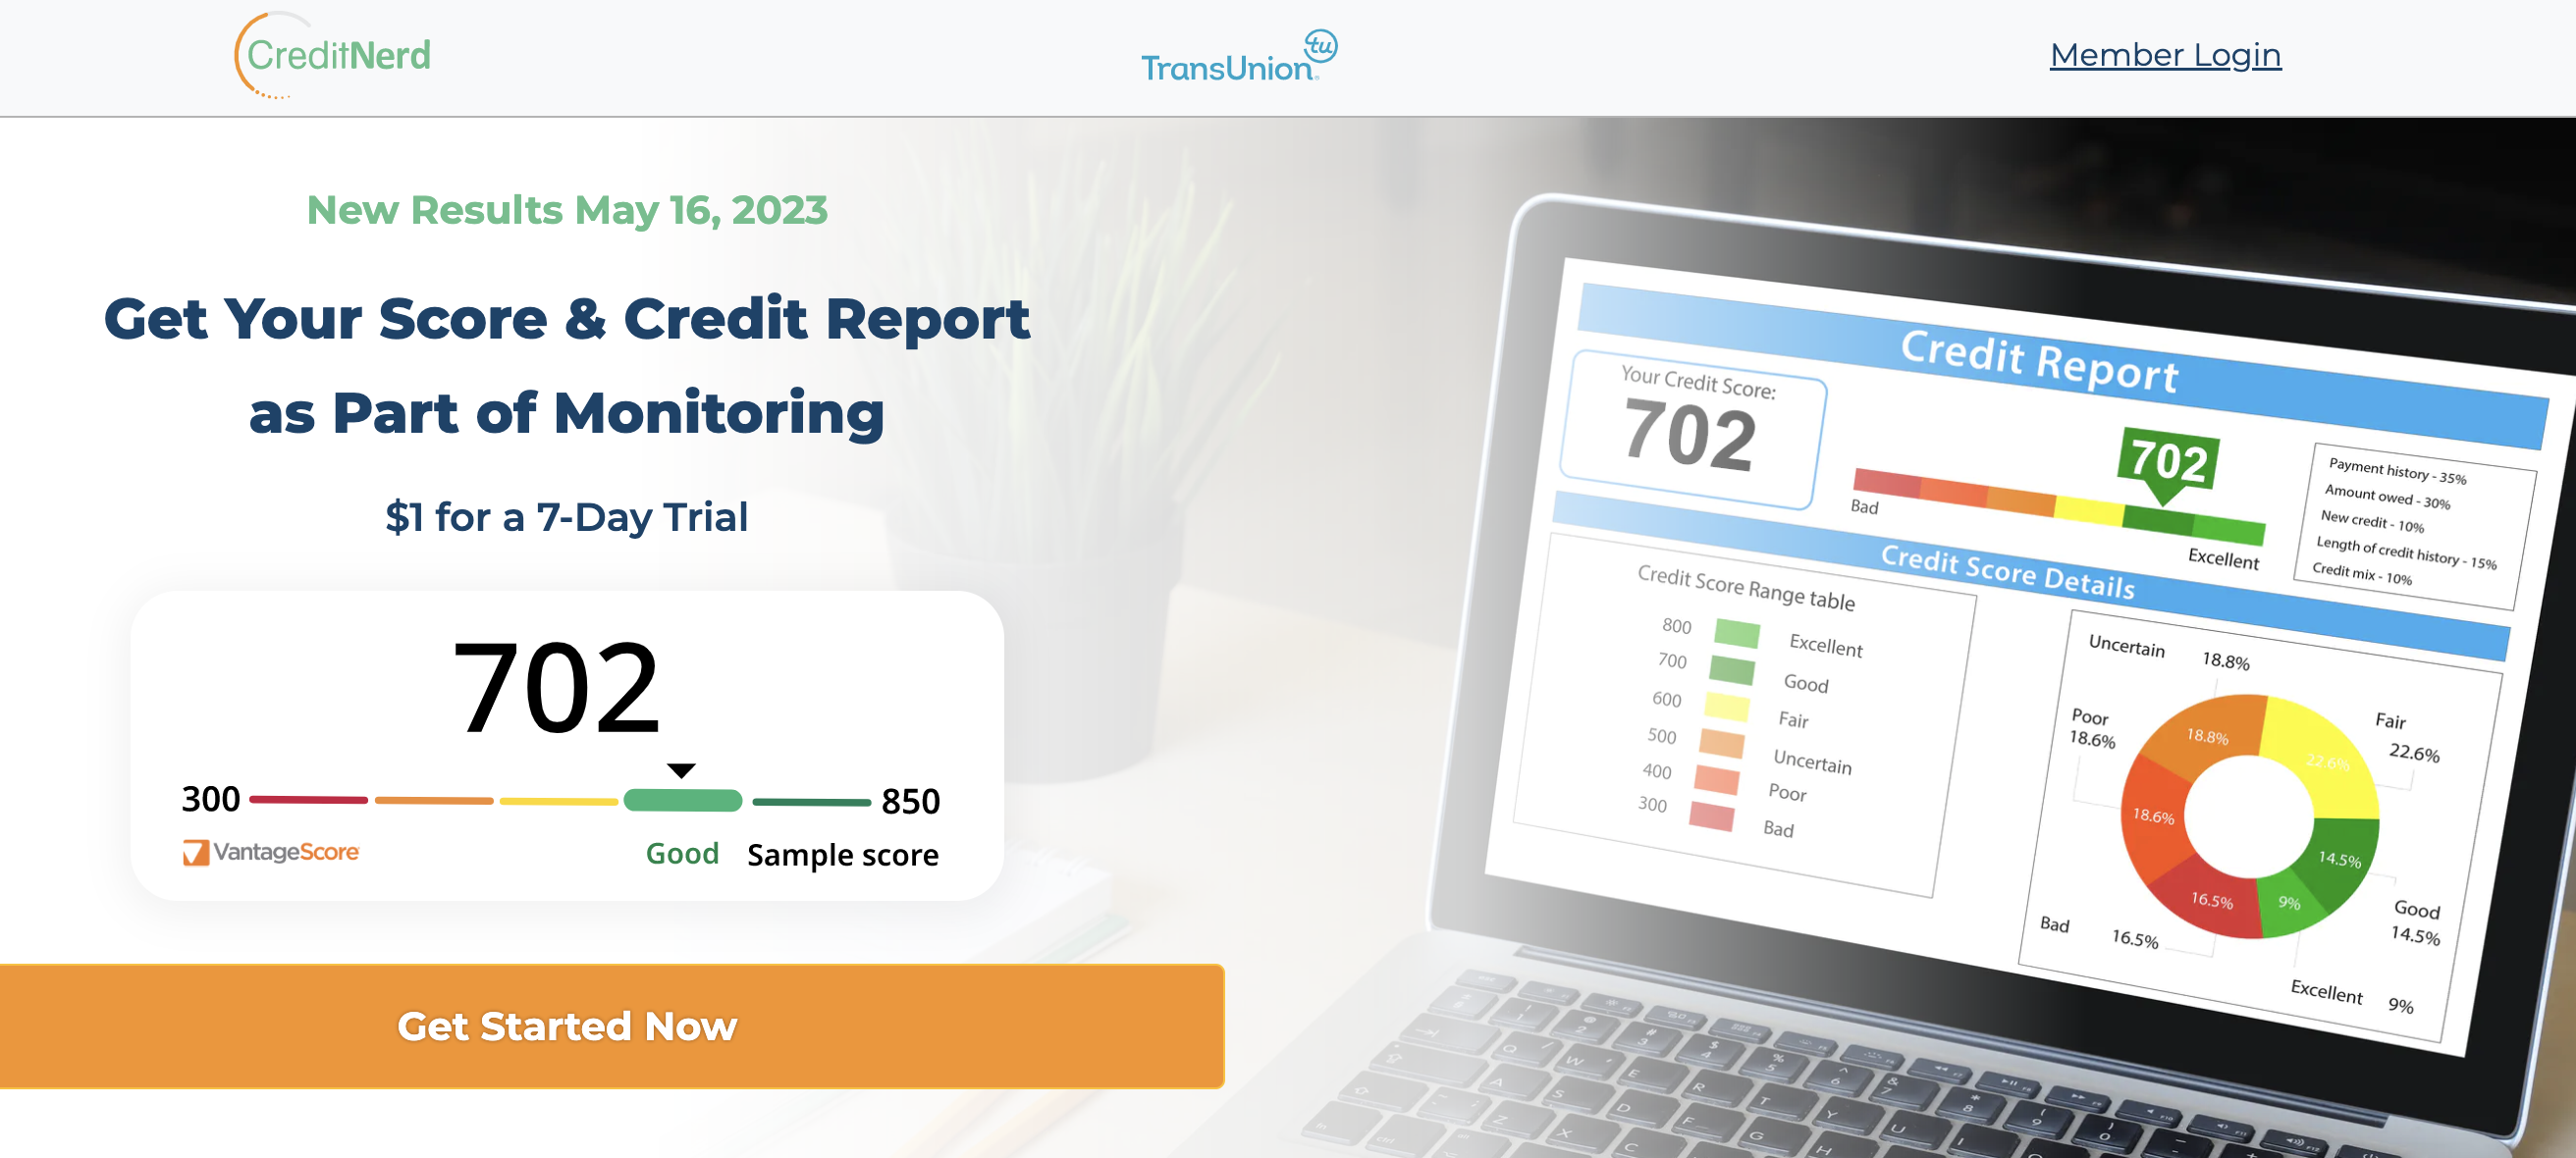 Credit Nerd Home Page